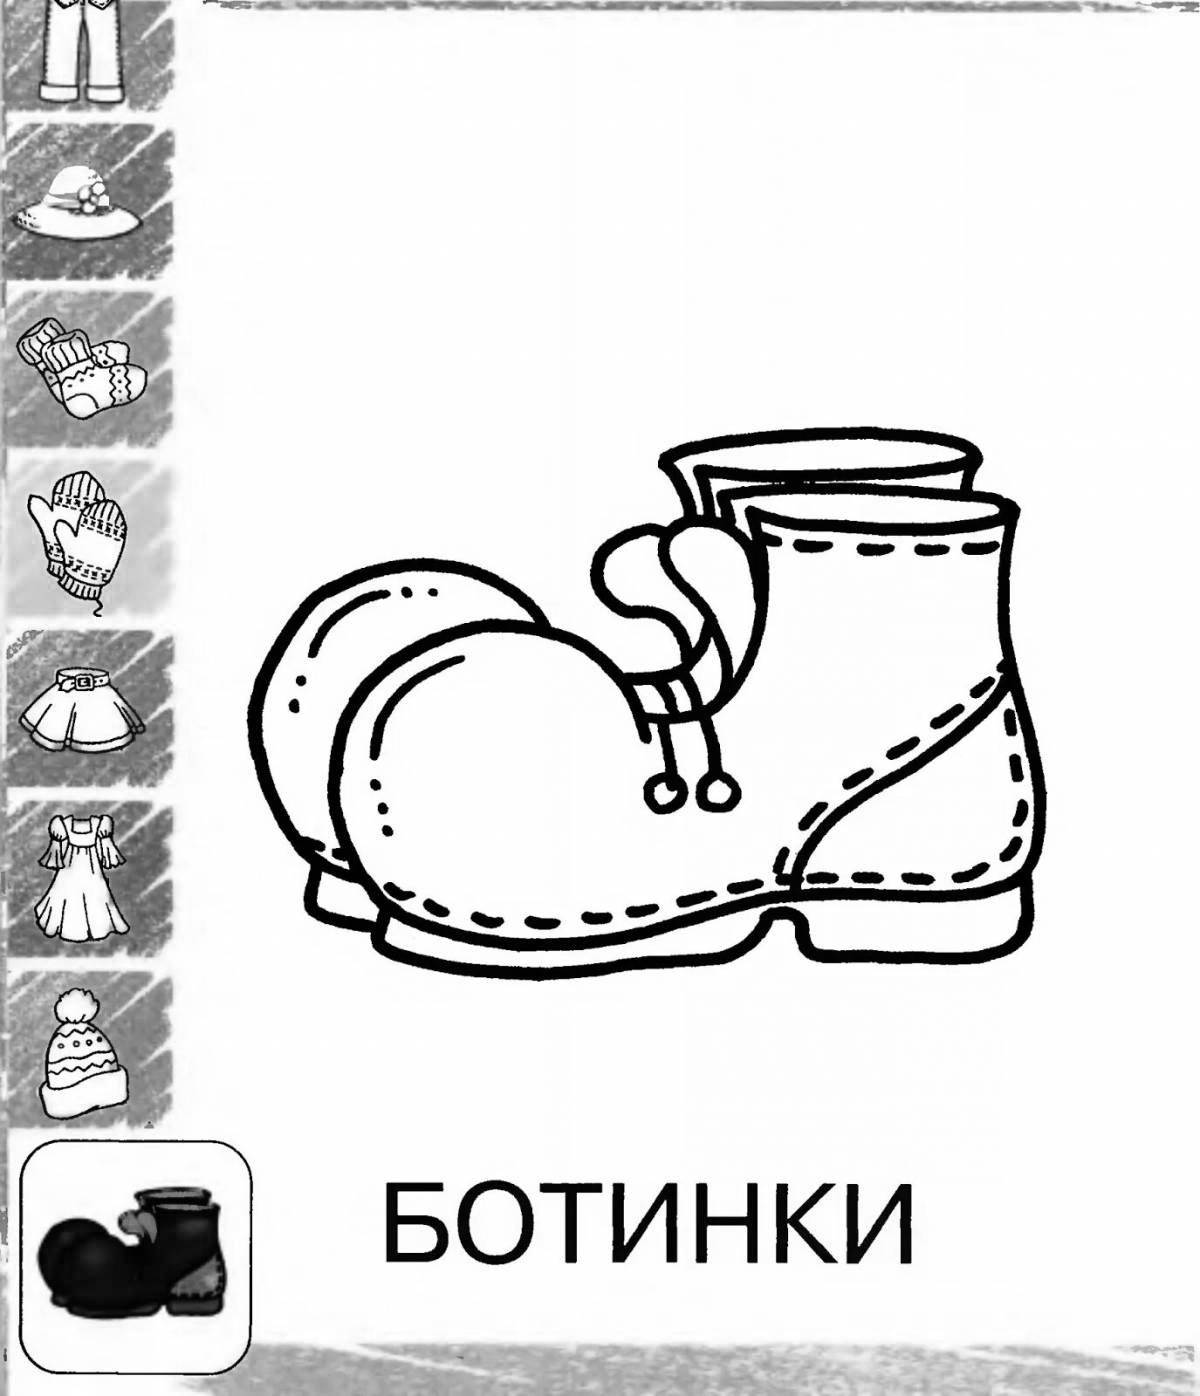 Outstanding boots coloring book for kids